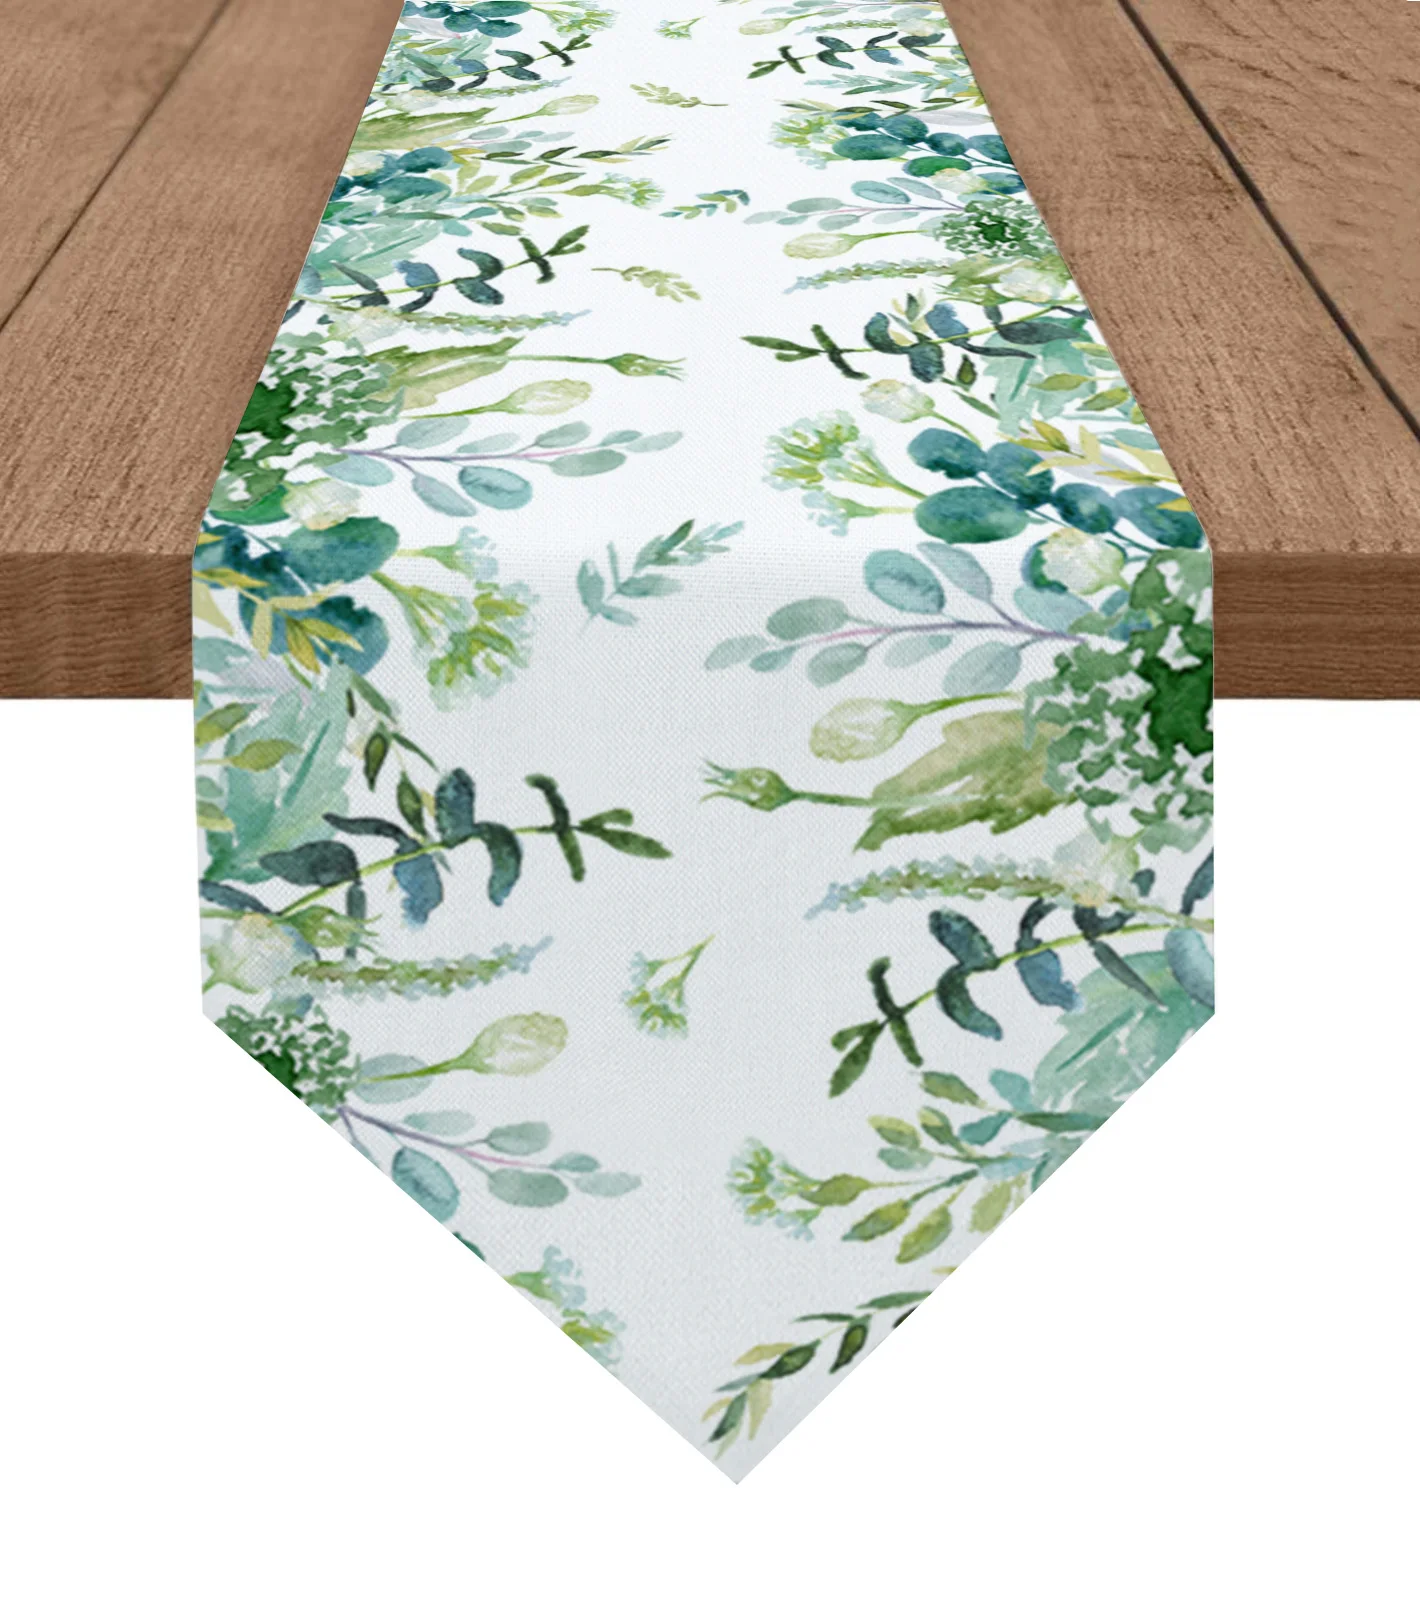 

Watercolor Eucalyptus Leaves Farm Table Runner Wedding Party Dining Table Runner Placemat Home Kitchen Table Decor